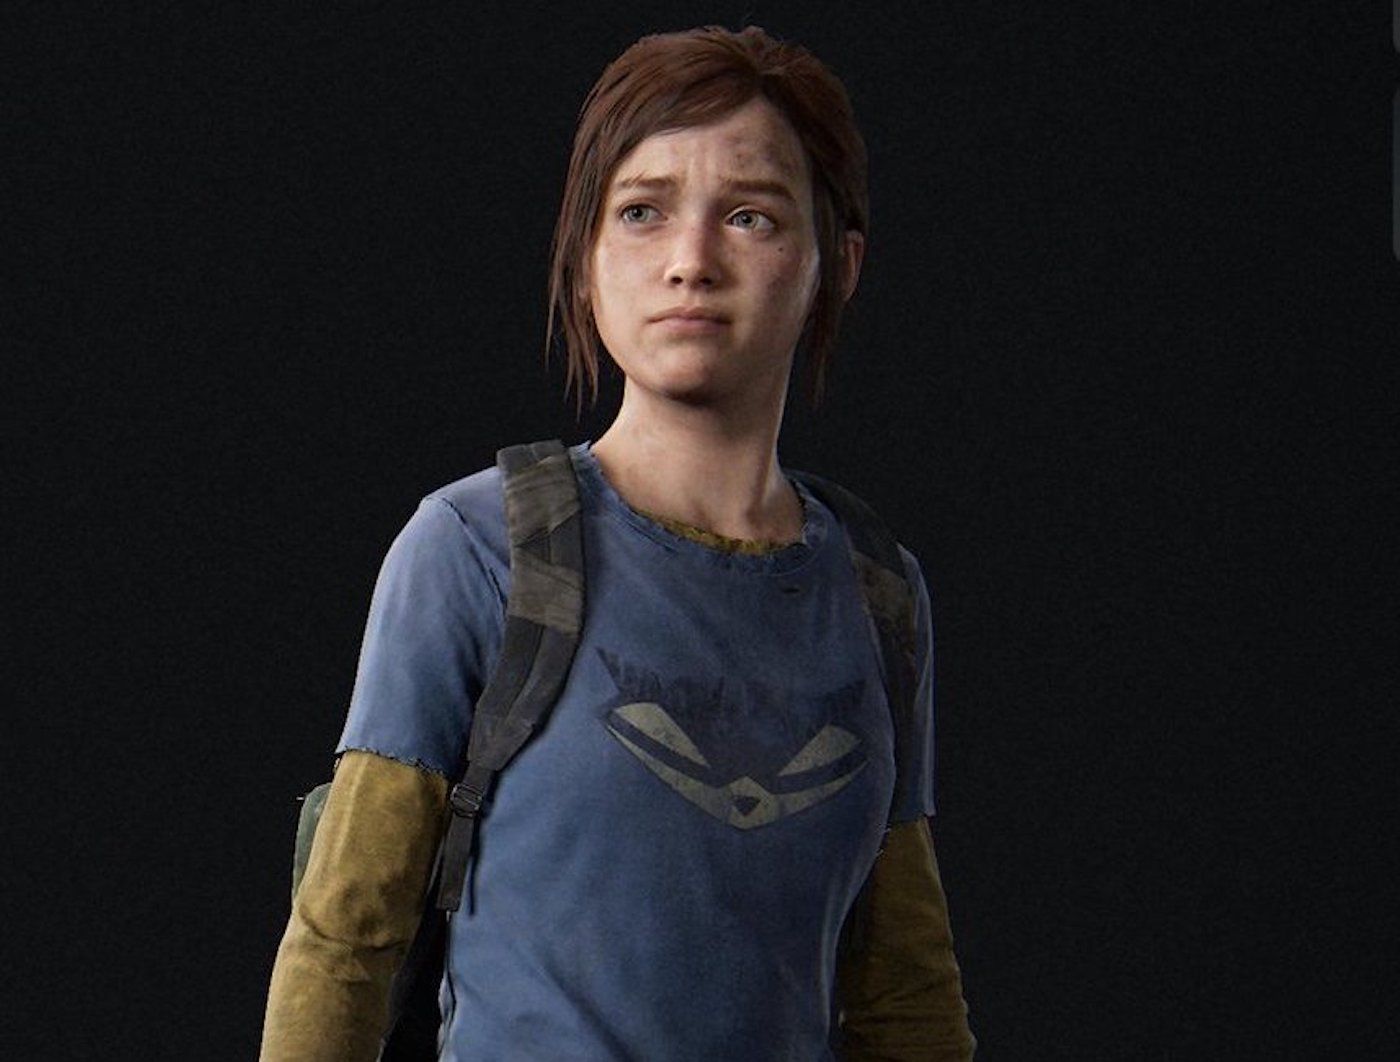 Ellie & Joel from The Last Of Us have invaded God Of War